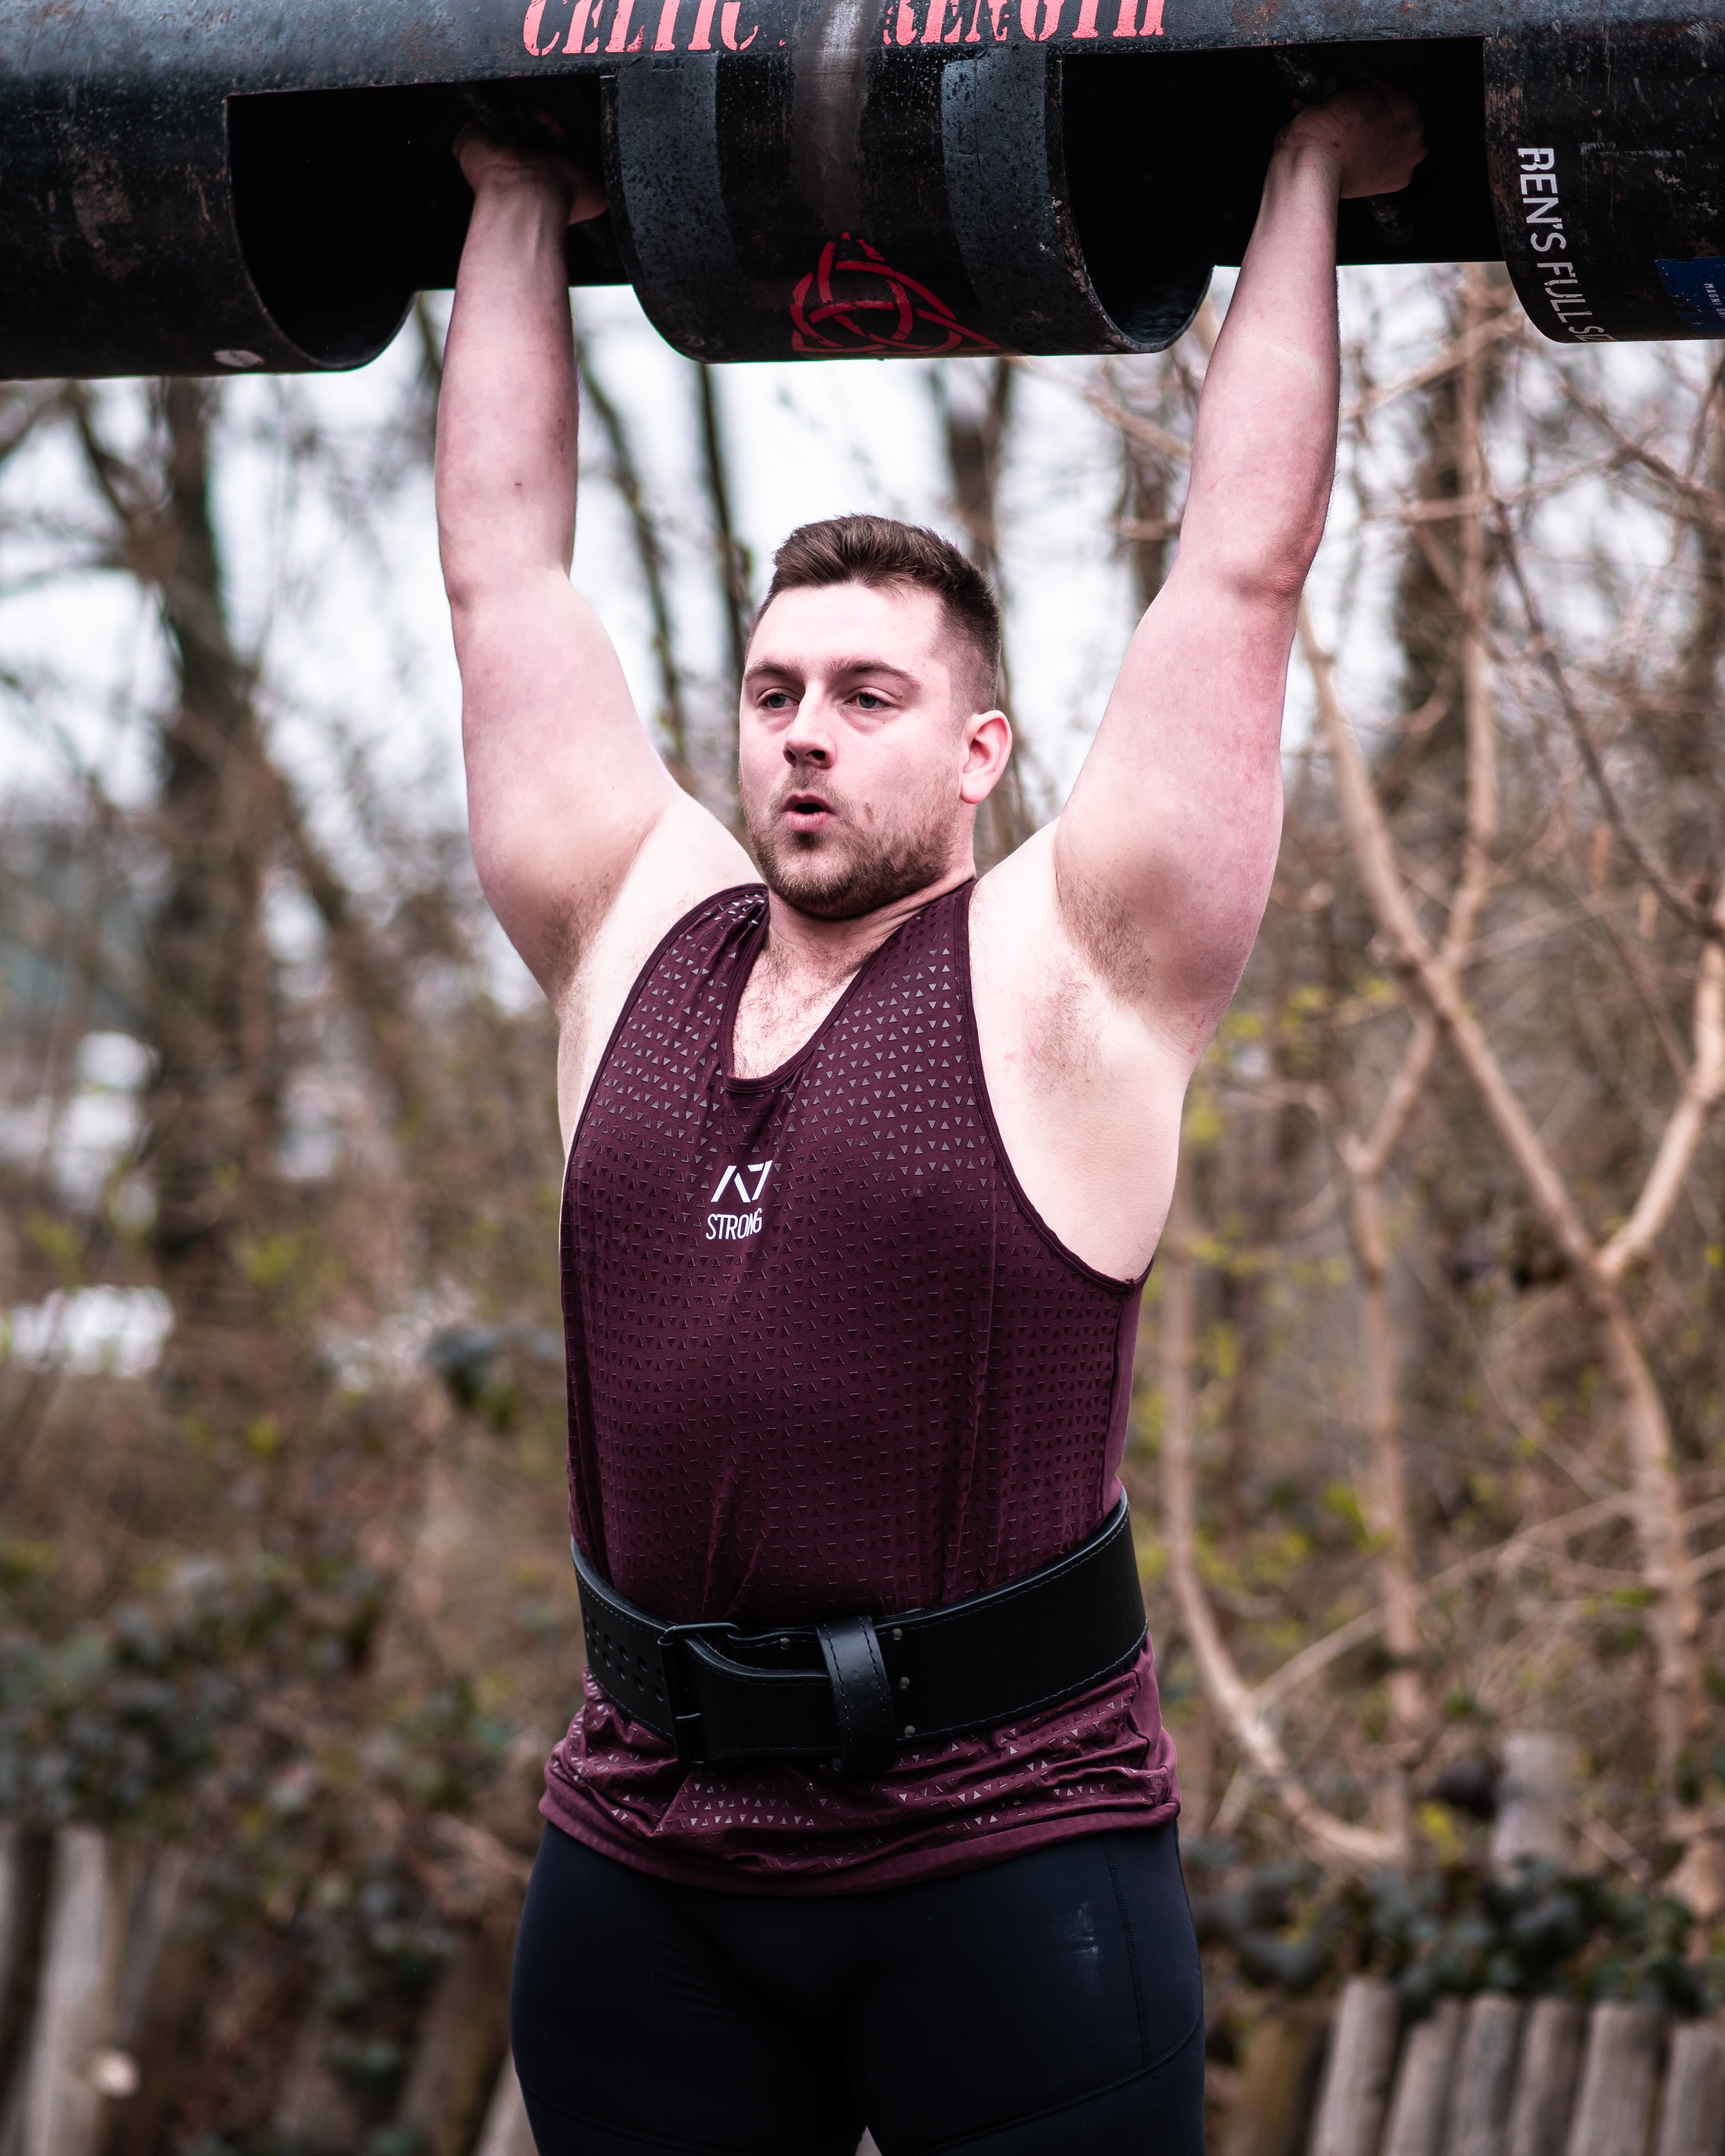 Best Gifts For Strongmen – A7 EUROPE